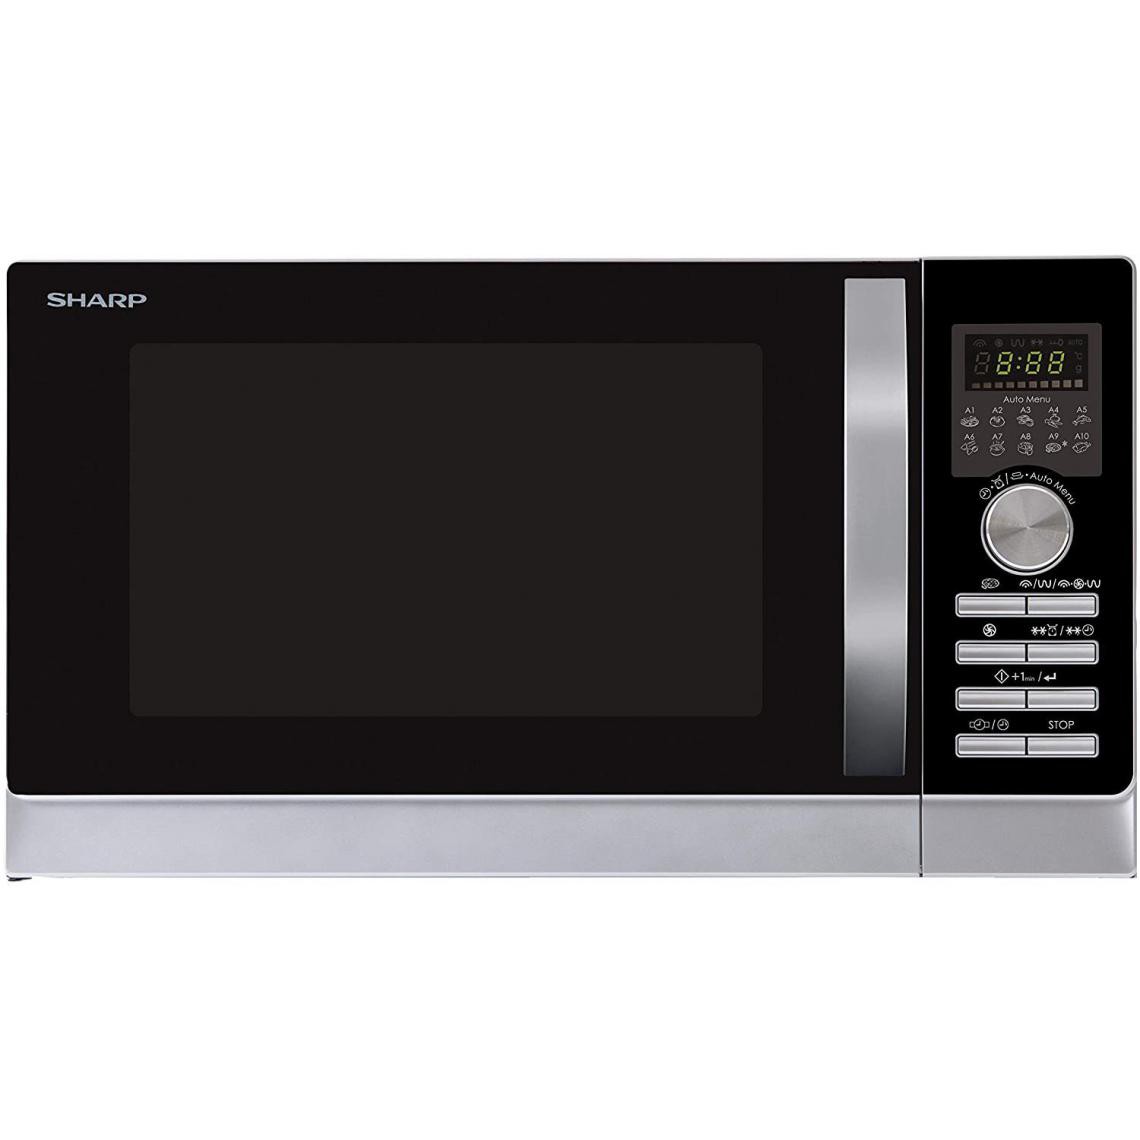 Sharp - Micro-ondes Grill - 25L - 900W - R843INW Argent - Four micro-ondes